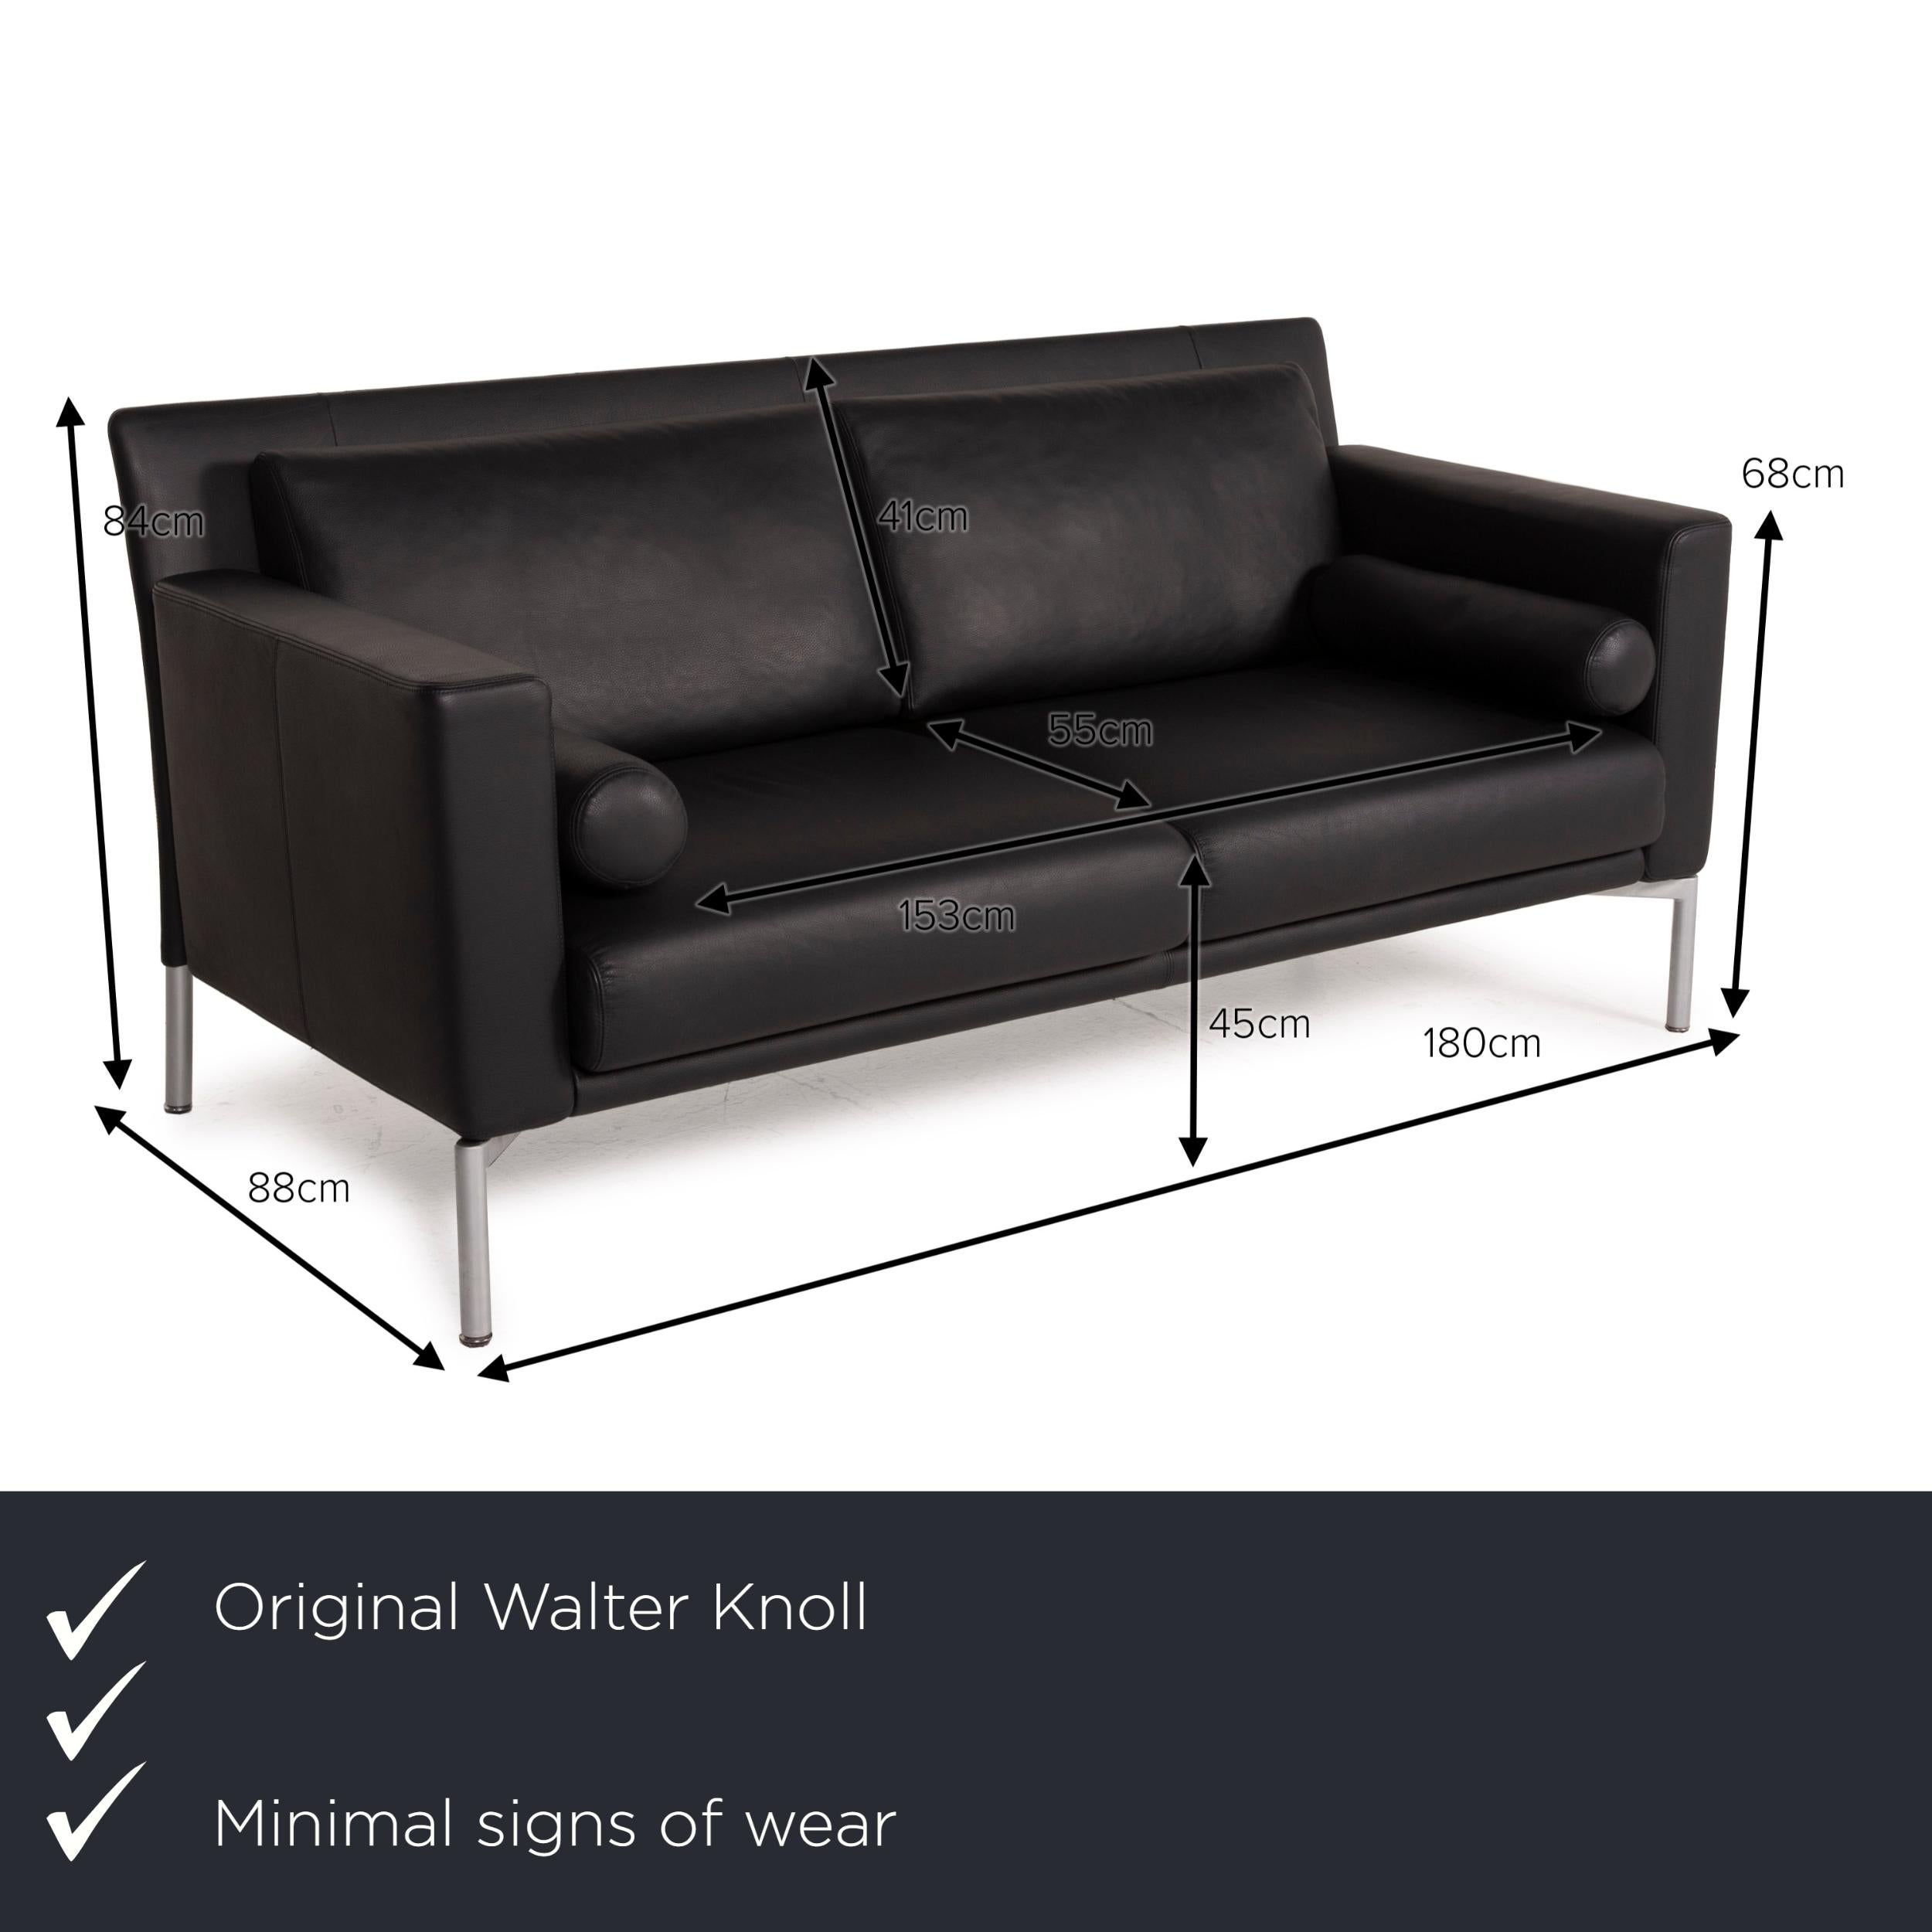 We present to you a Walter Knoll Jason 390 leather sofa black two-seater.


 Product measurements in centimeters:
 

Depth: 88
Width: 180
Height: 84
Seat height: 45
Rest height: 68
Seat depth: 55
Seat width: 153
Back height: 41.
 